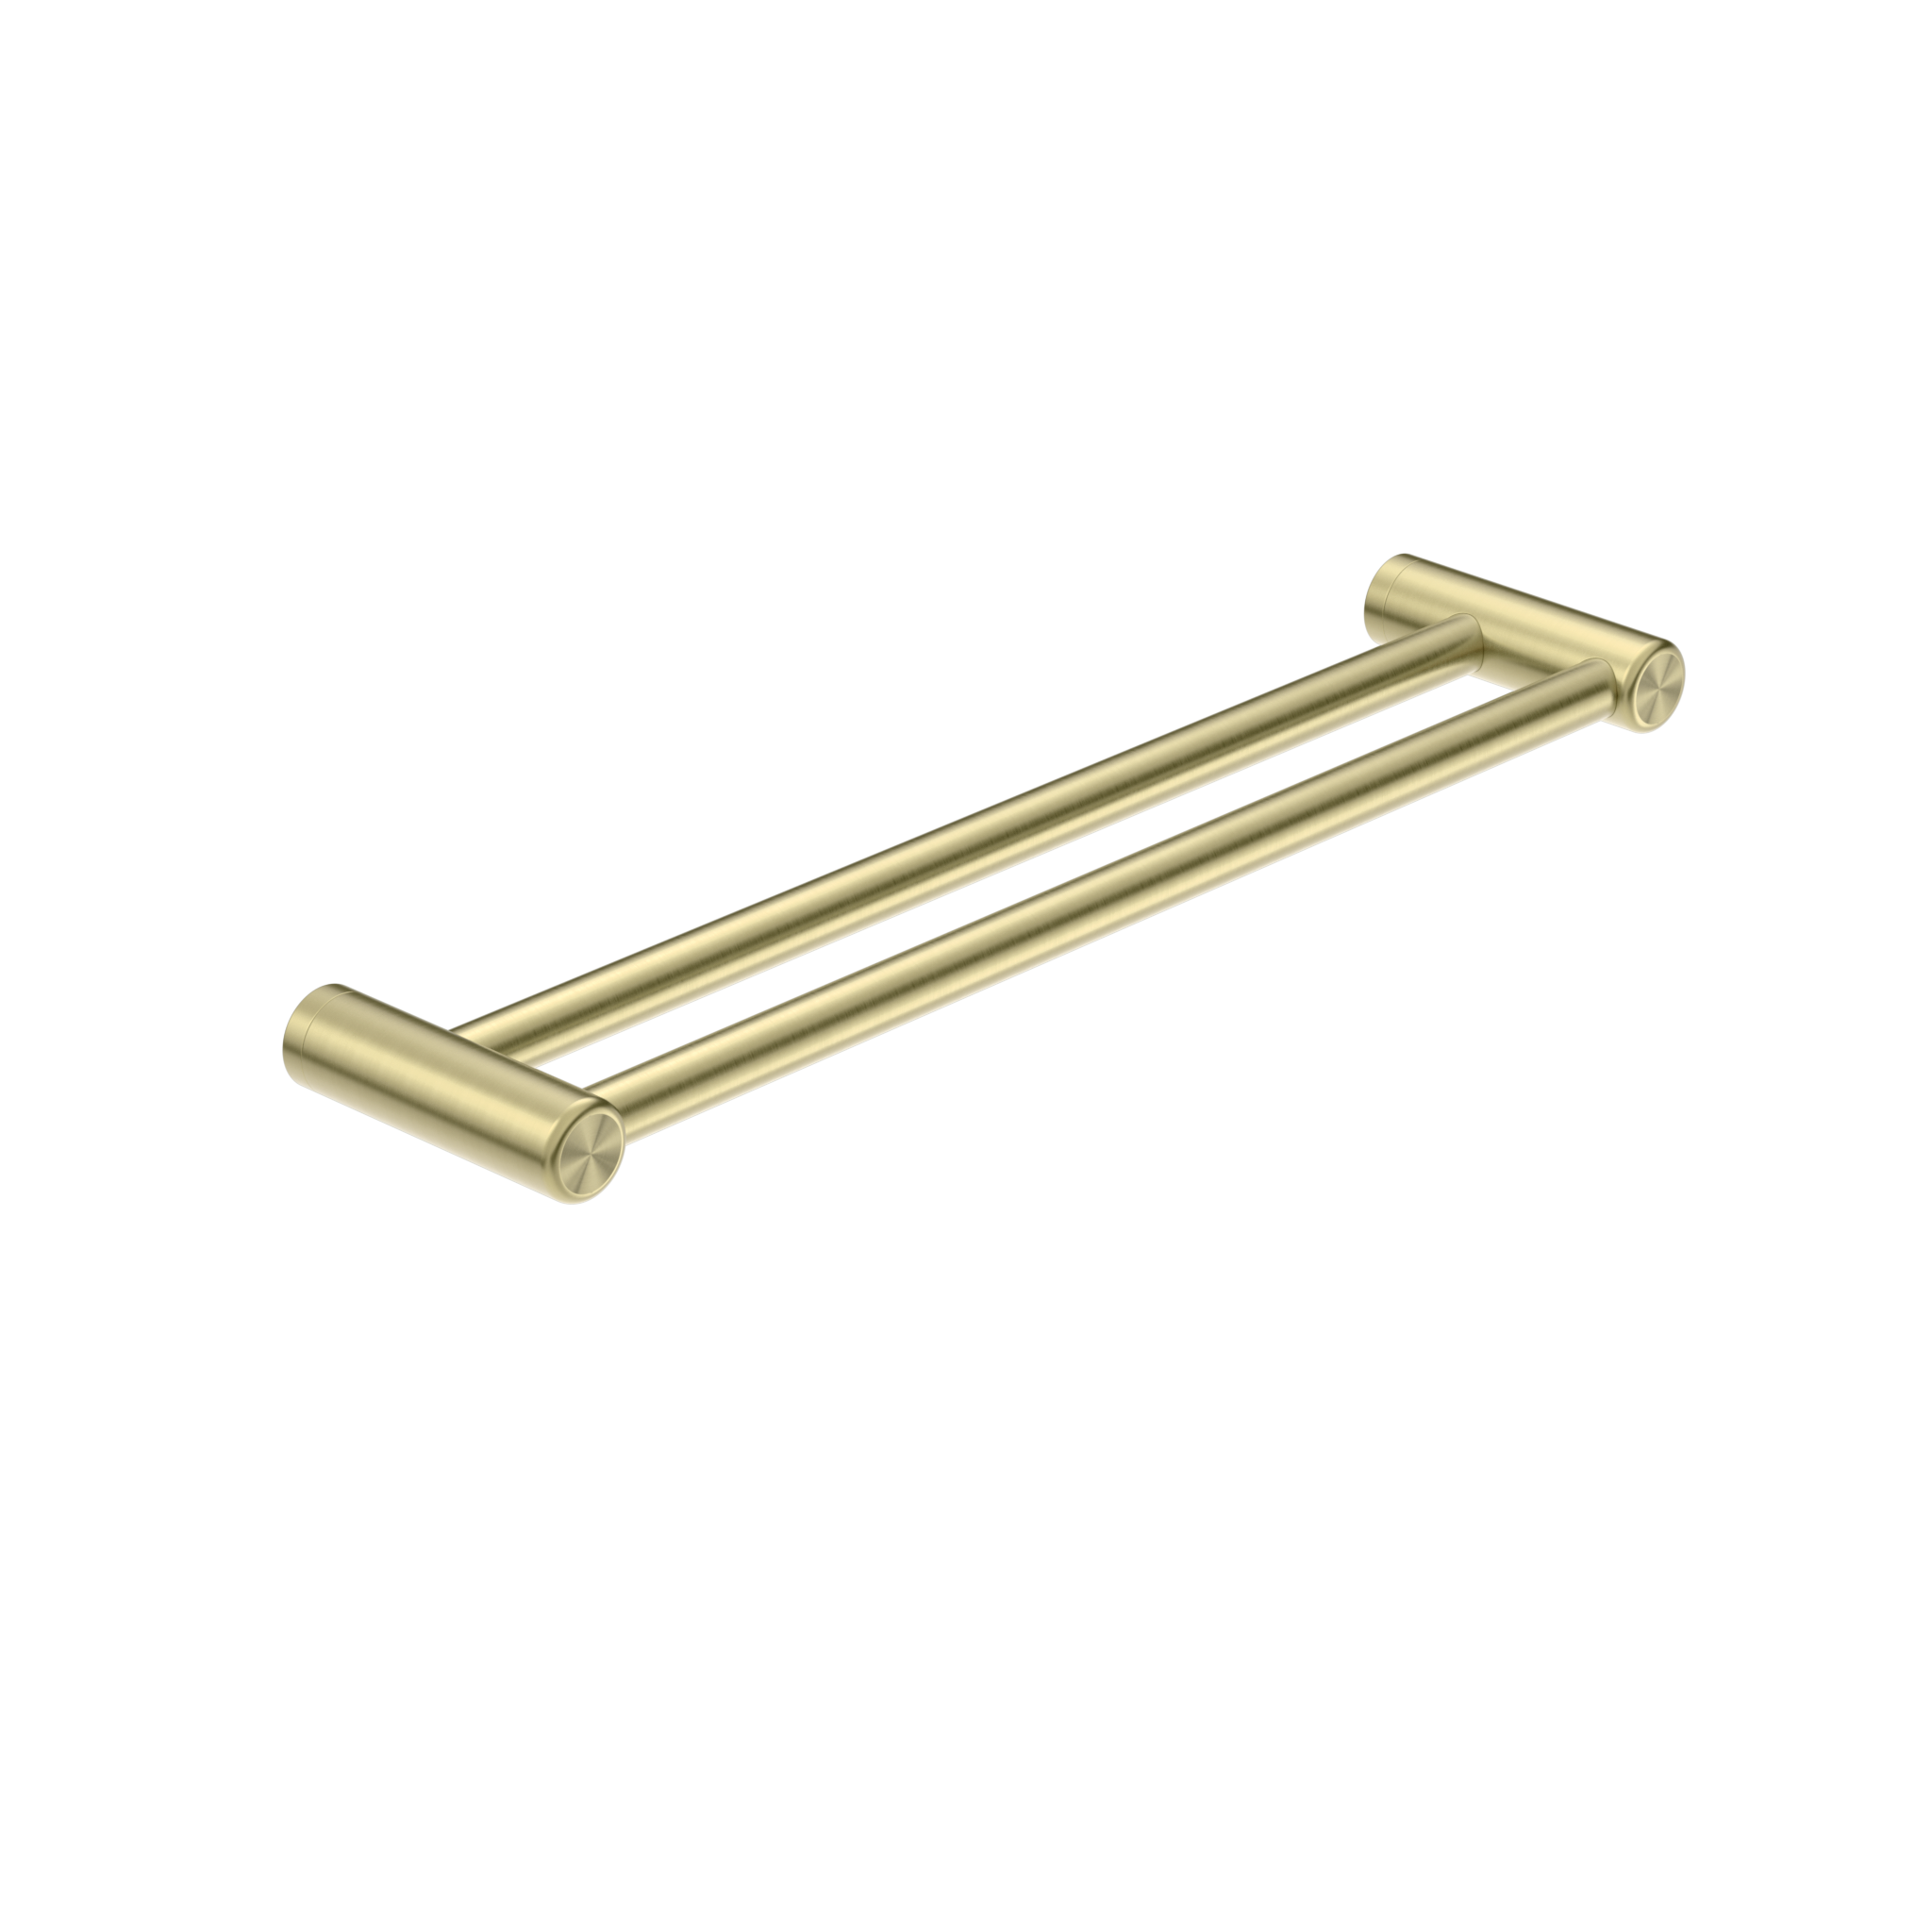 CALIBRE MECCA 25MM DOUBLE TOWEL GRAB RAIL 600MM BRUSHED GOLD